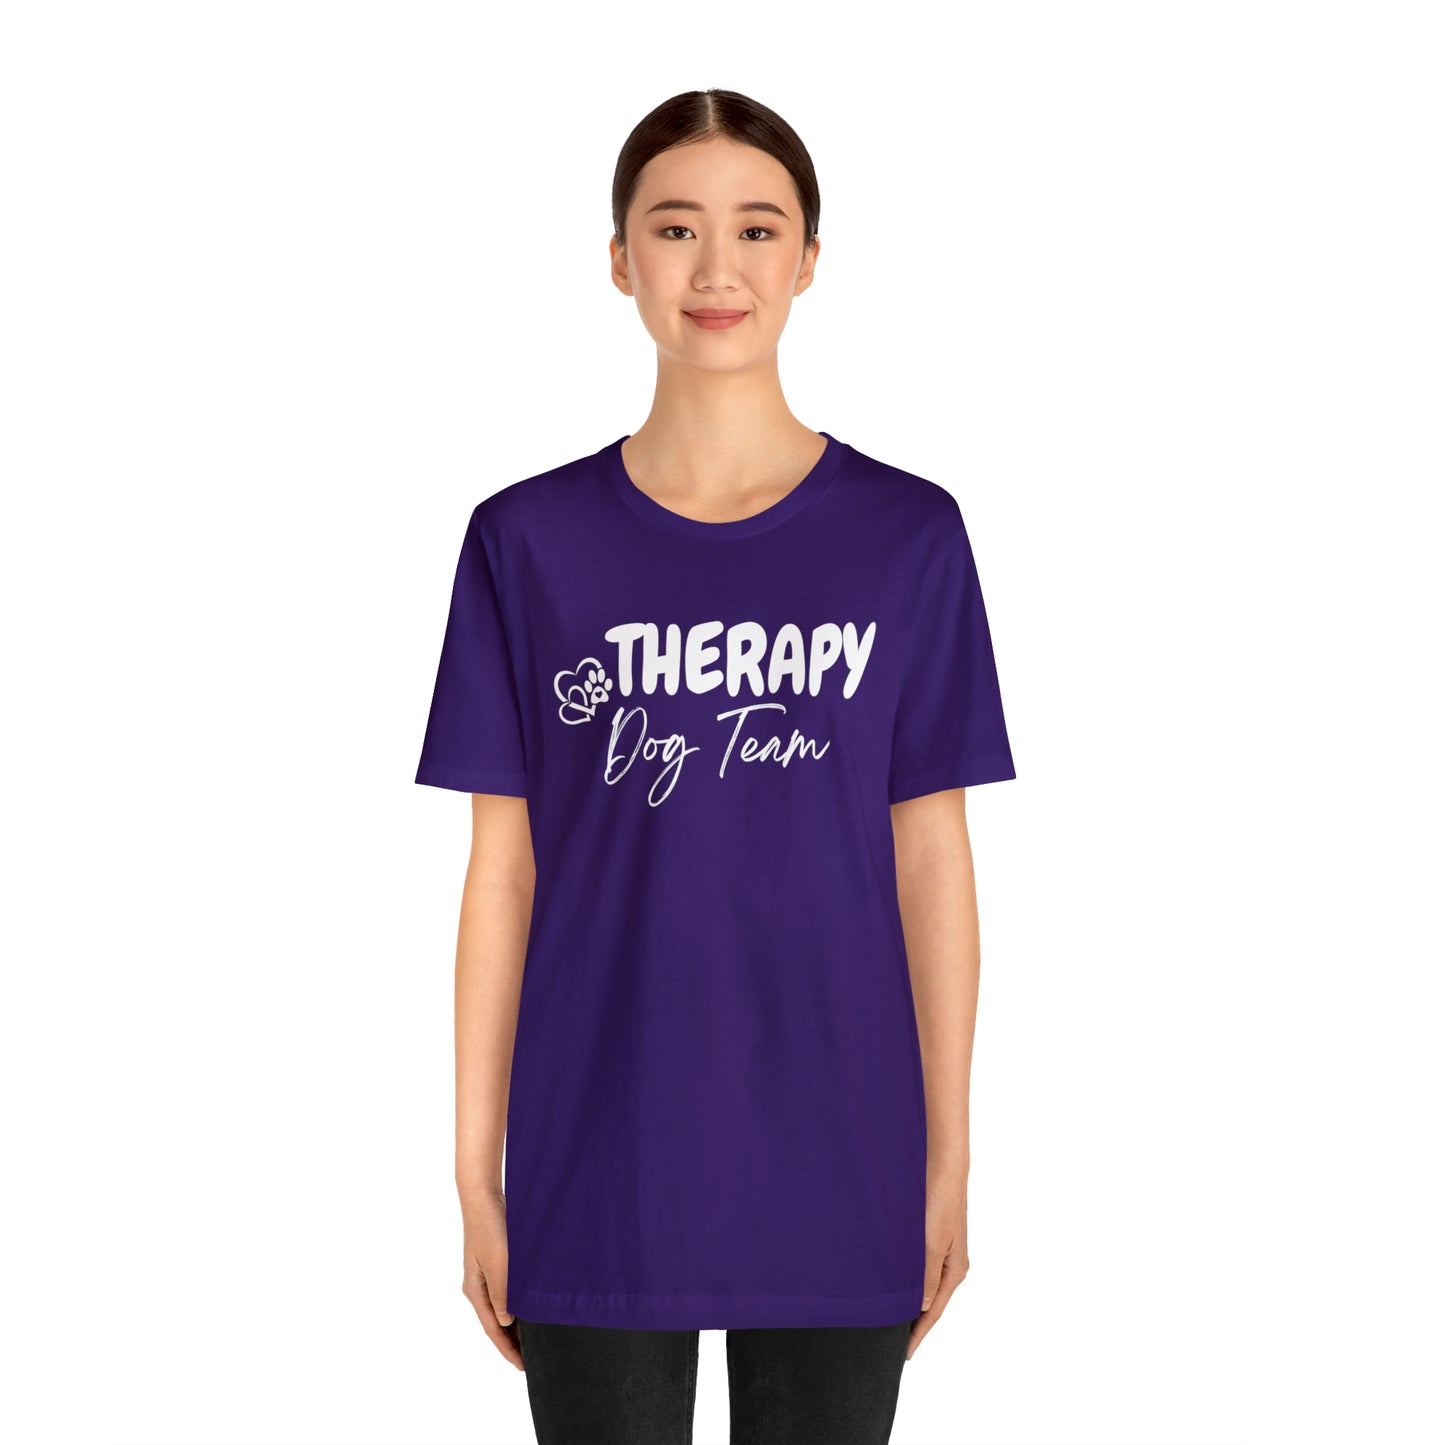 5 - THERAPY  DOG TEAM   - Unisex Jersey Short Sleeve Tee